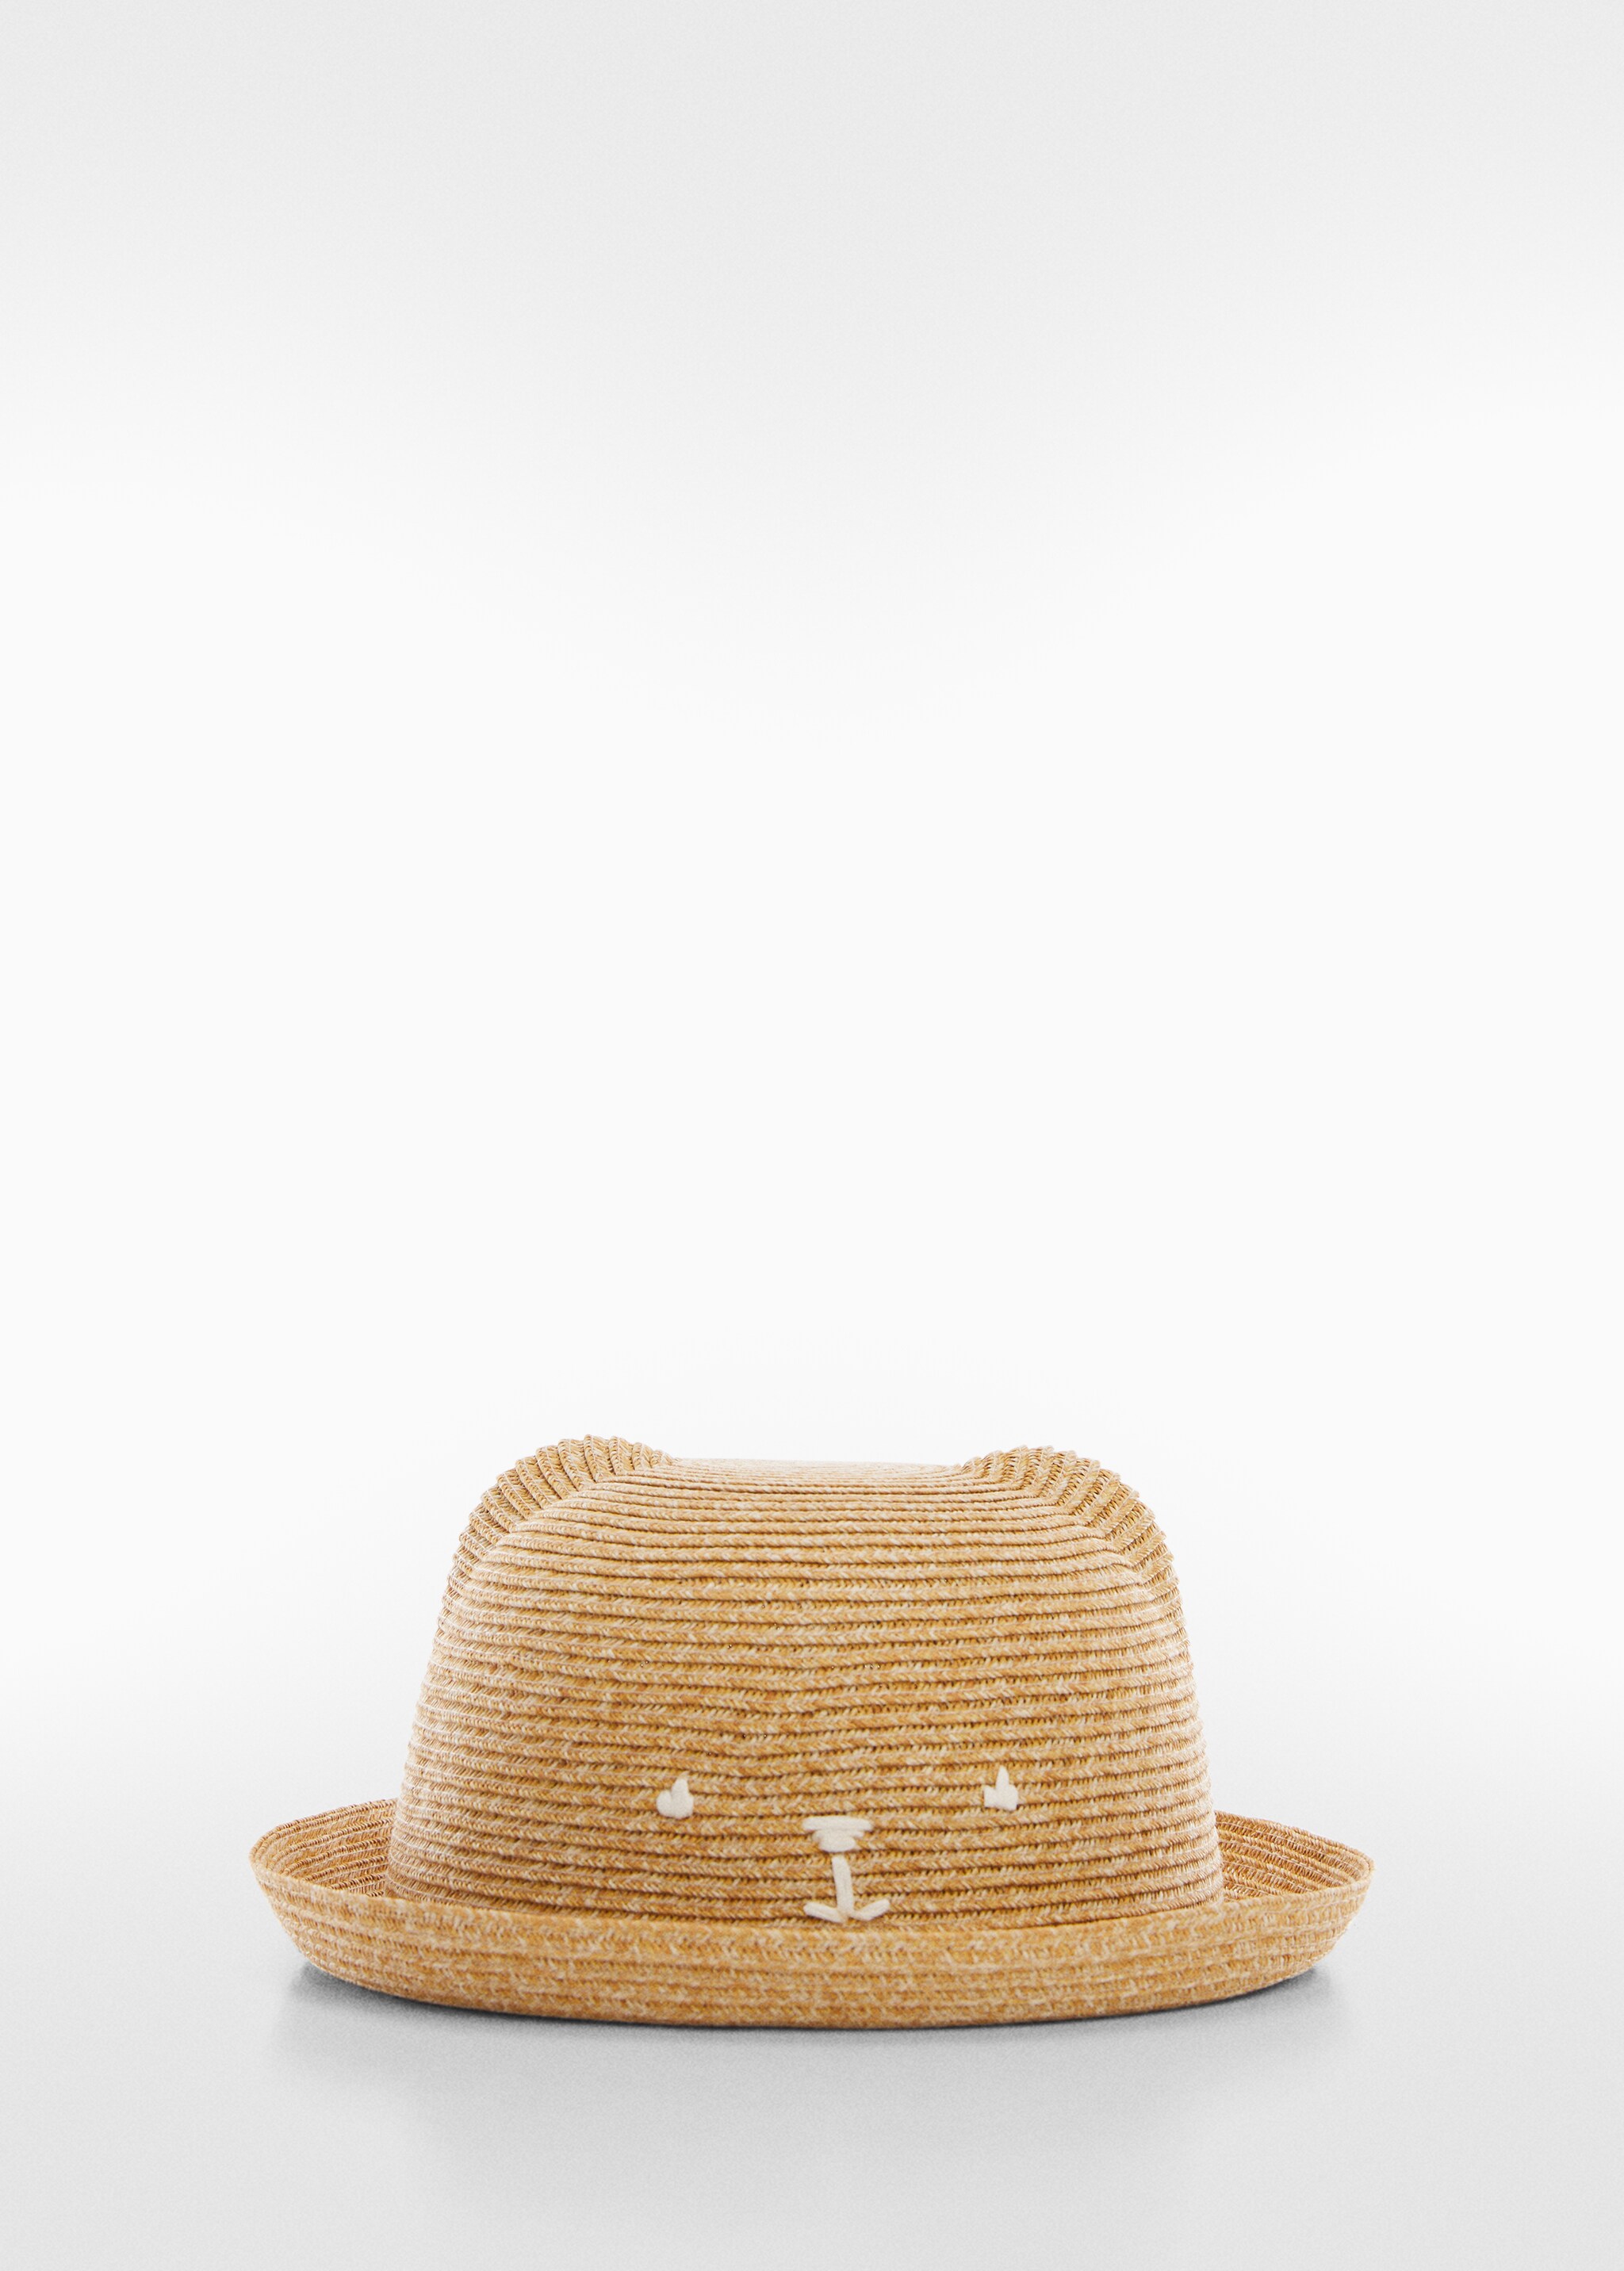 Straw hat with ears - Article without model